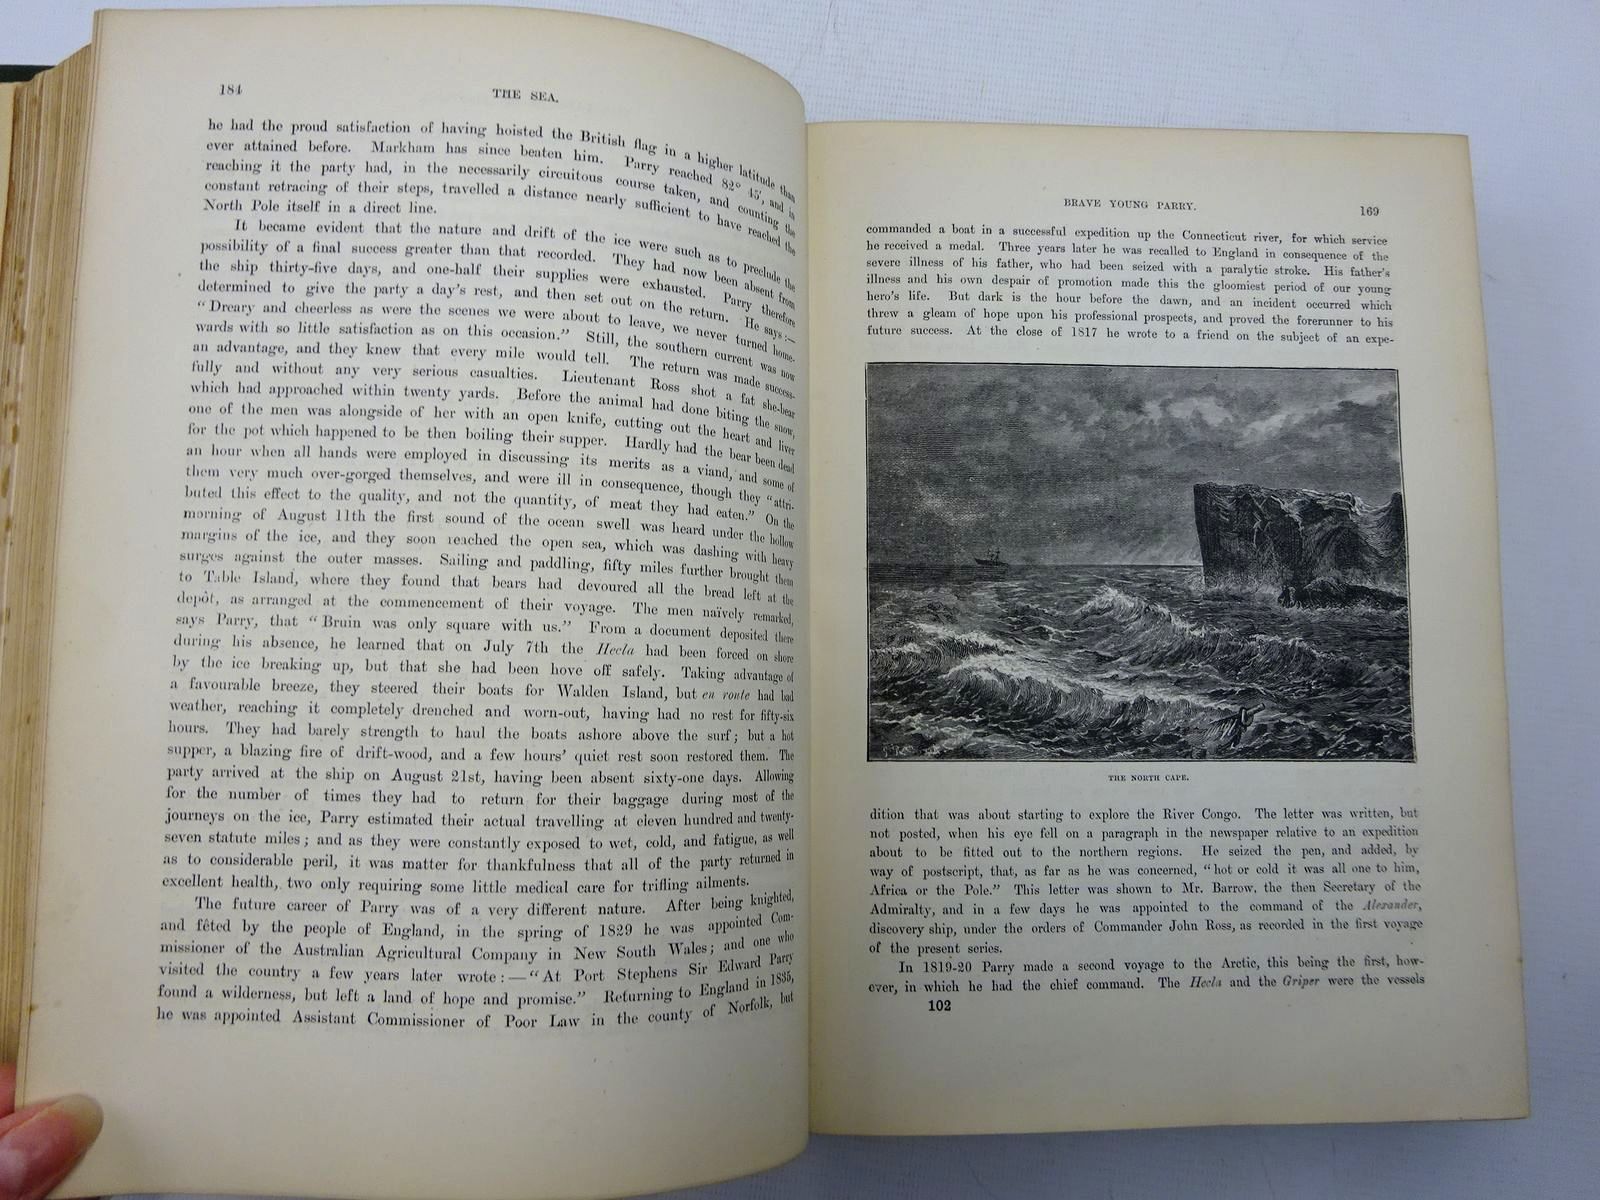 Photo of THE SEA (2 VOLUMES) written by Whymper, F. published by Cassell Petter & Galpin (STOCK CODE: 2128580)  for sale by Stella & Rose's Books